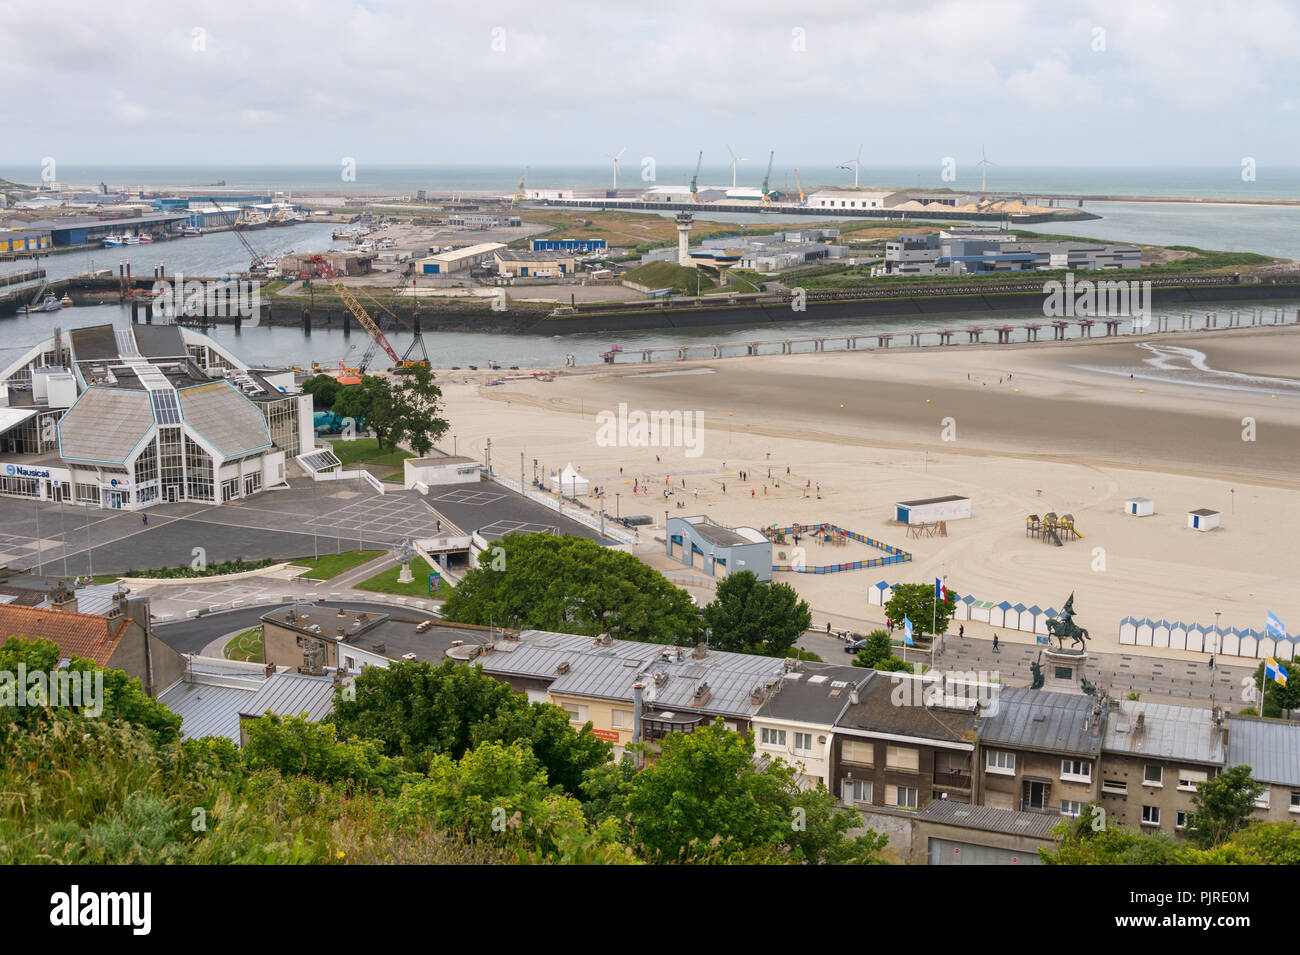 Boulogne-sur-Mer, France - 16 June 2018: Top view of the harbor and the beach. Stock Photo